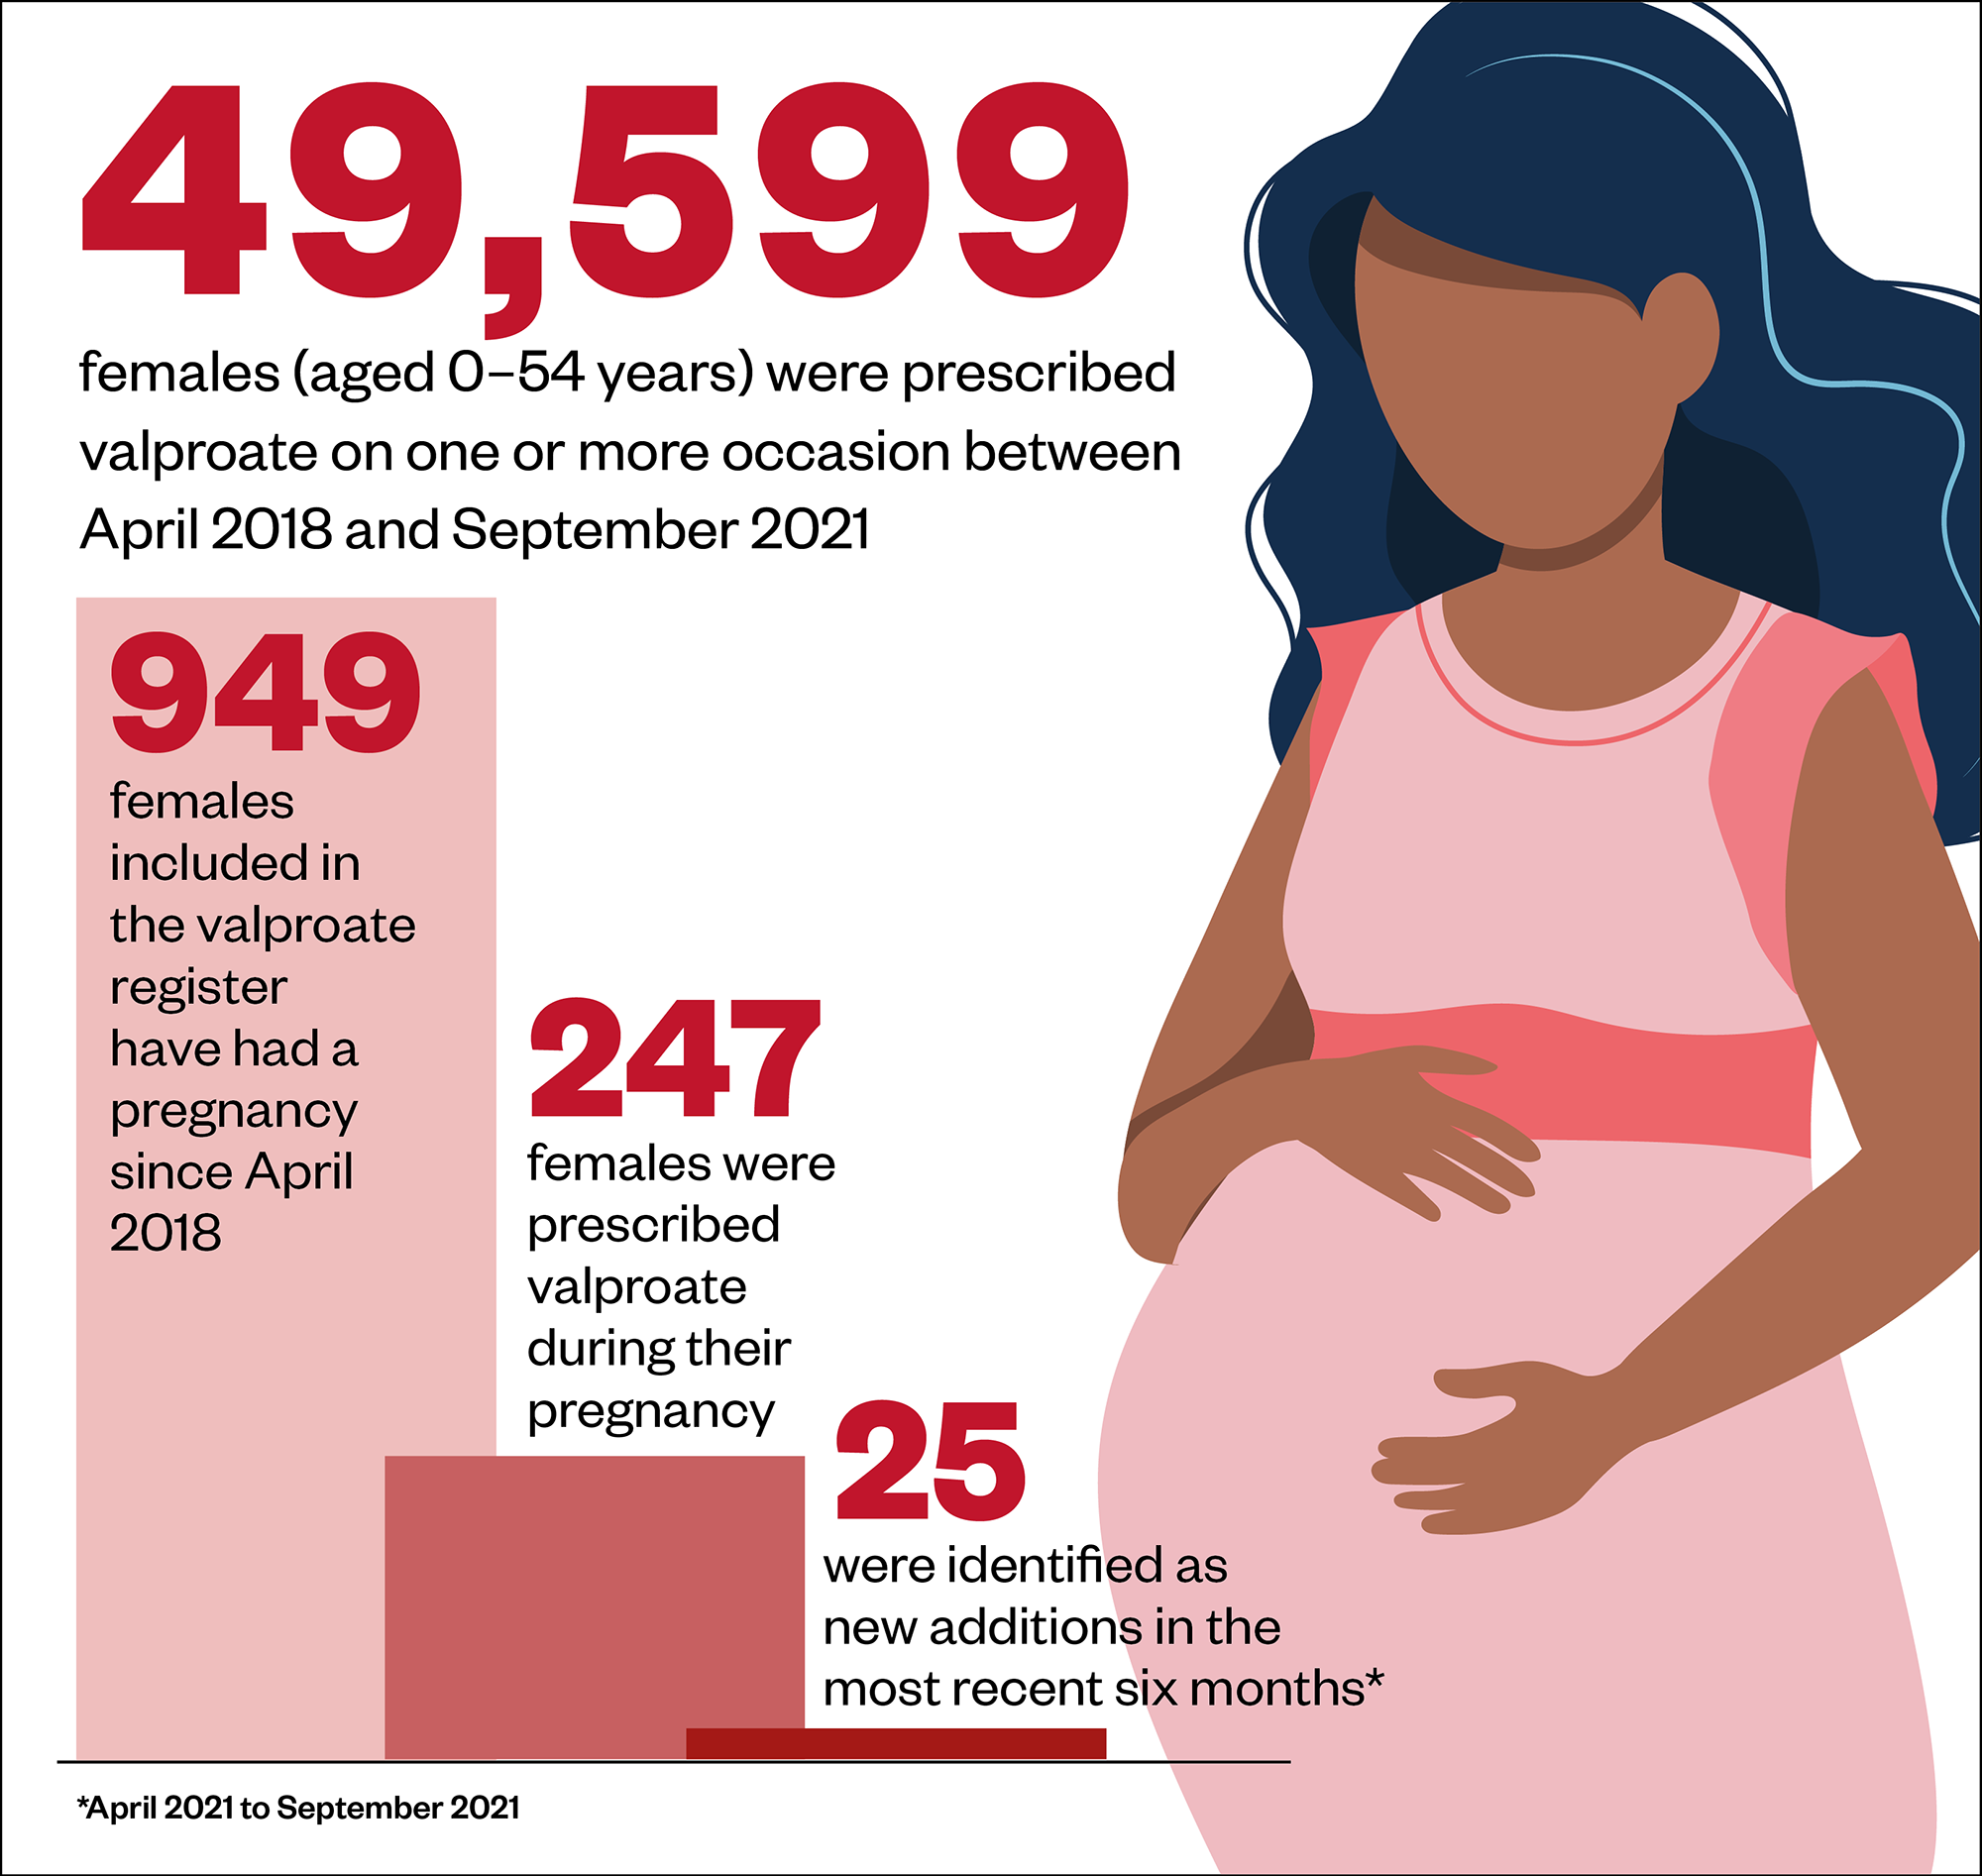 Figure 2: Valproate use in females between April 2018 and September 2021
Source: Medicines and Pregnancy Registry (March 2022)